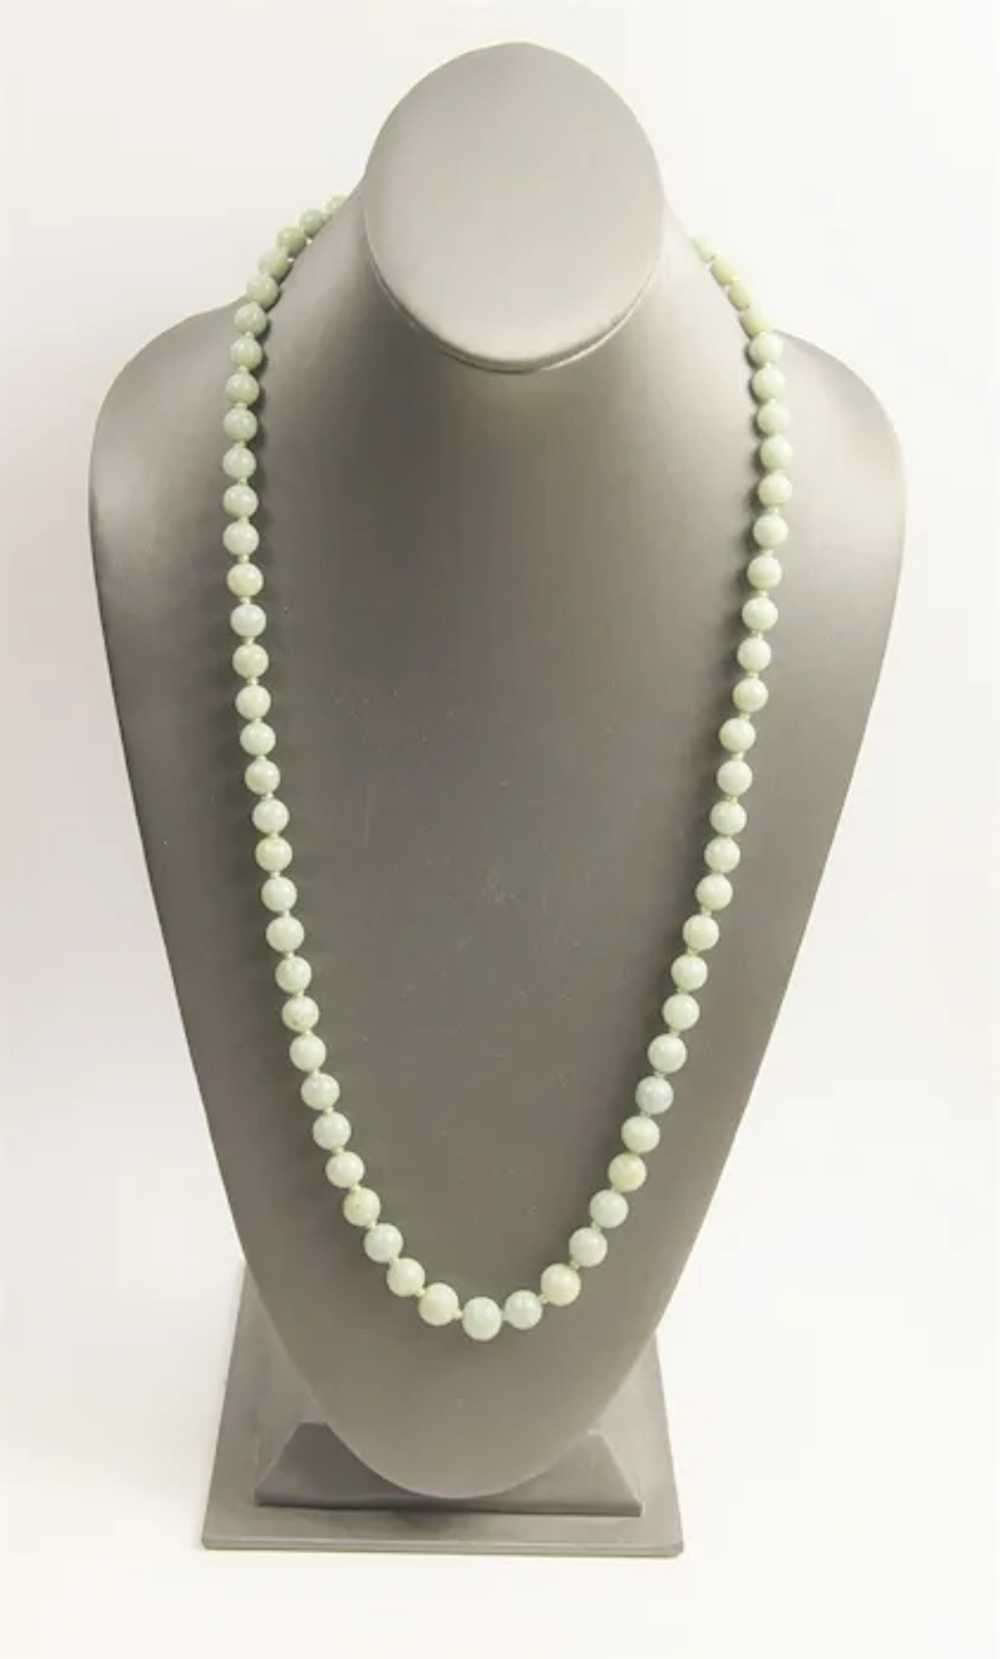 14kt Gold Clasp & Jade Bead Necklace - image 3